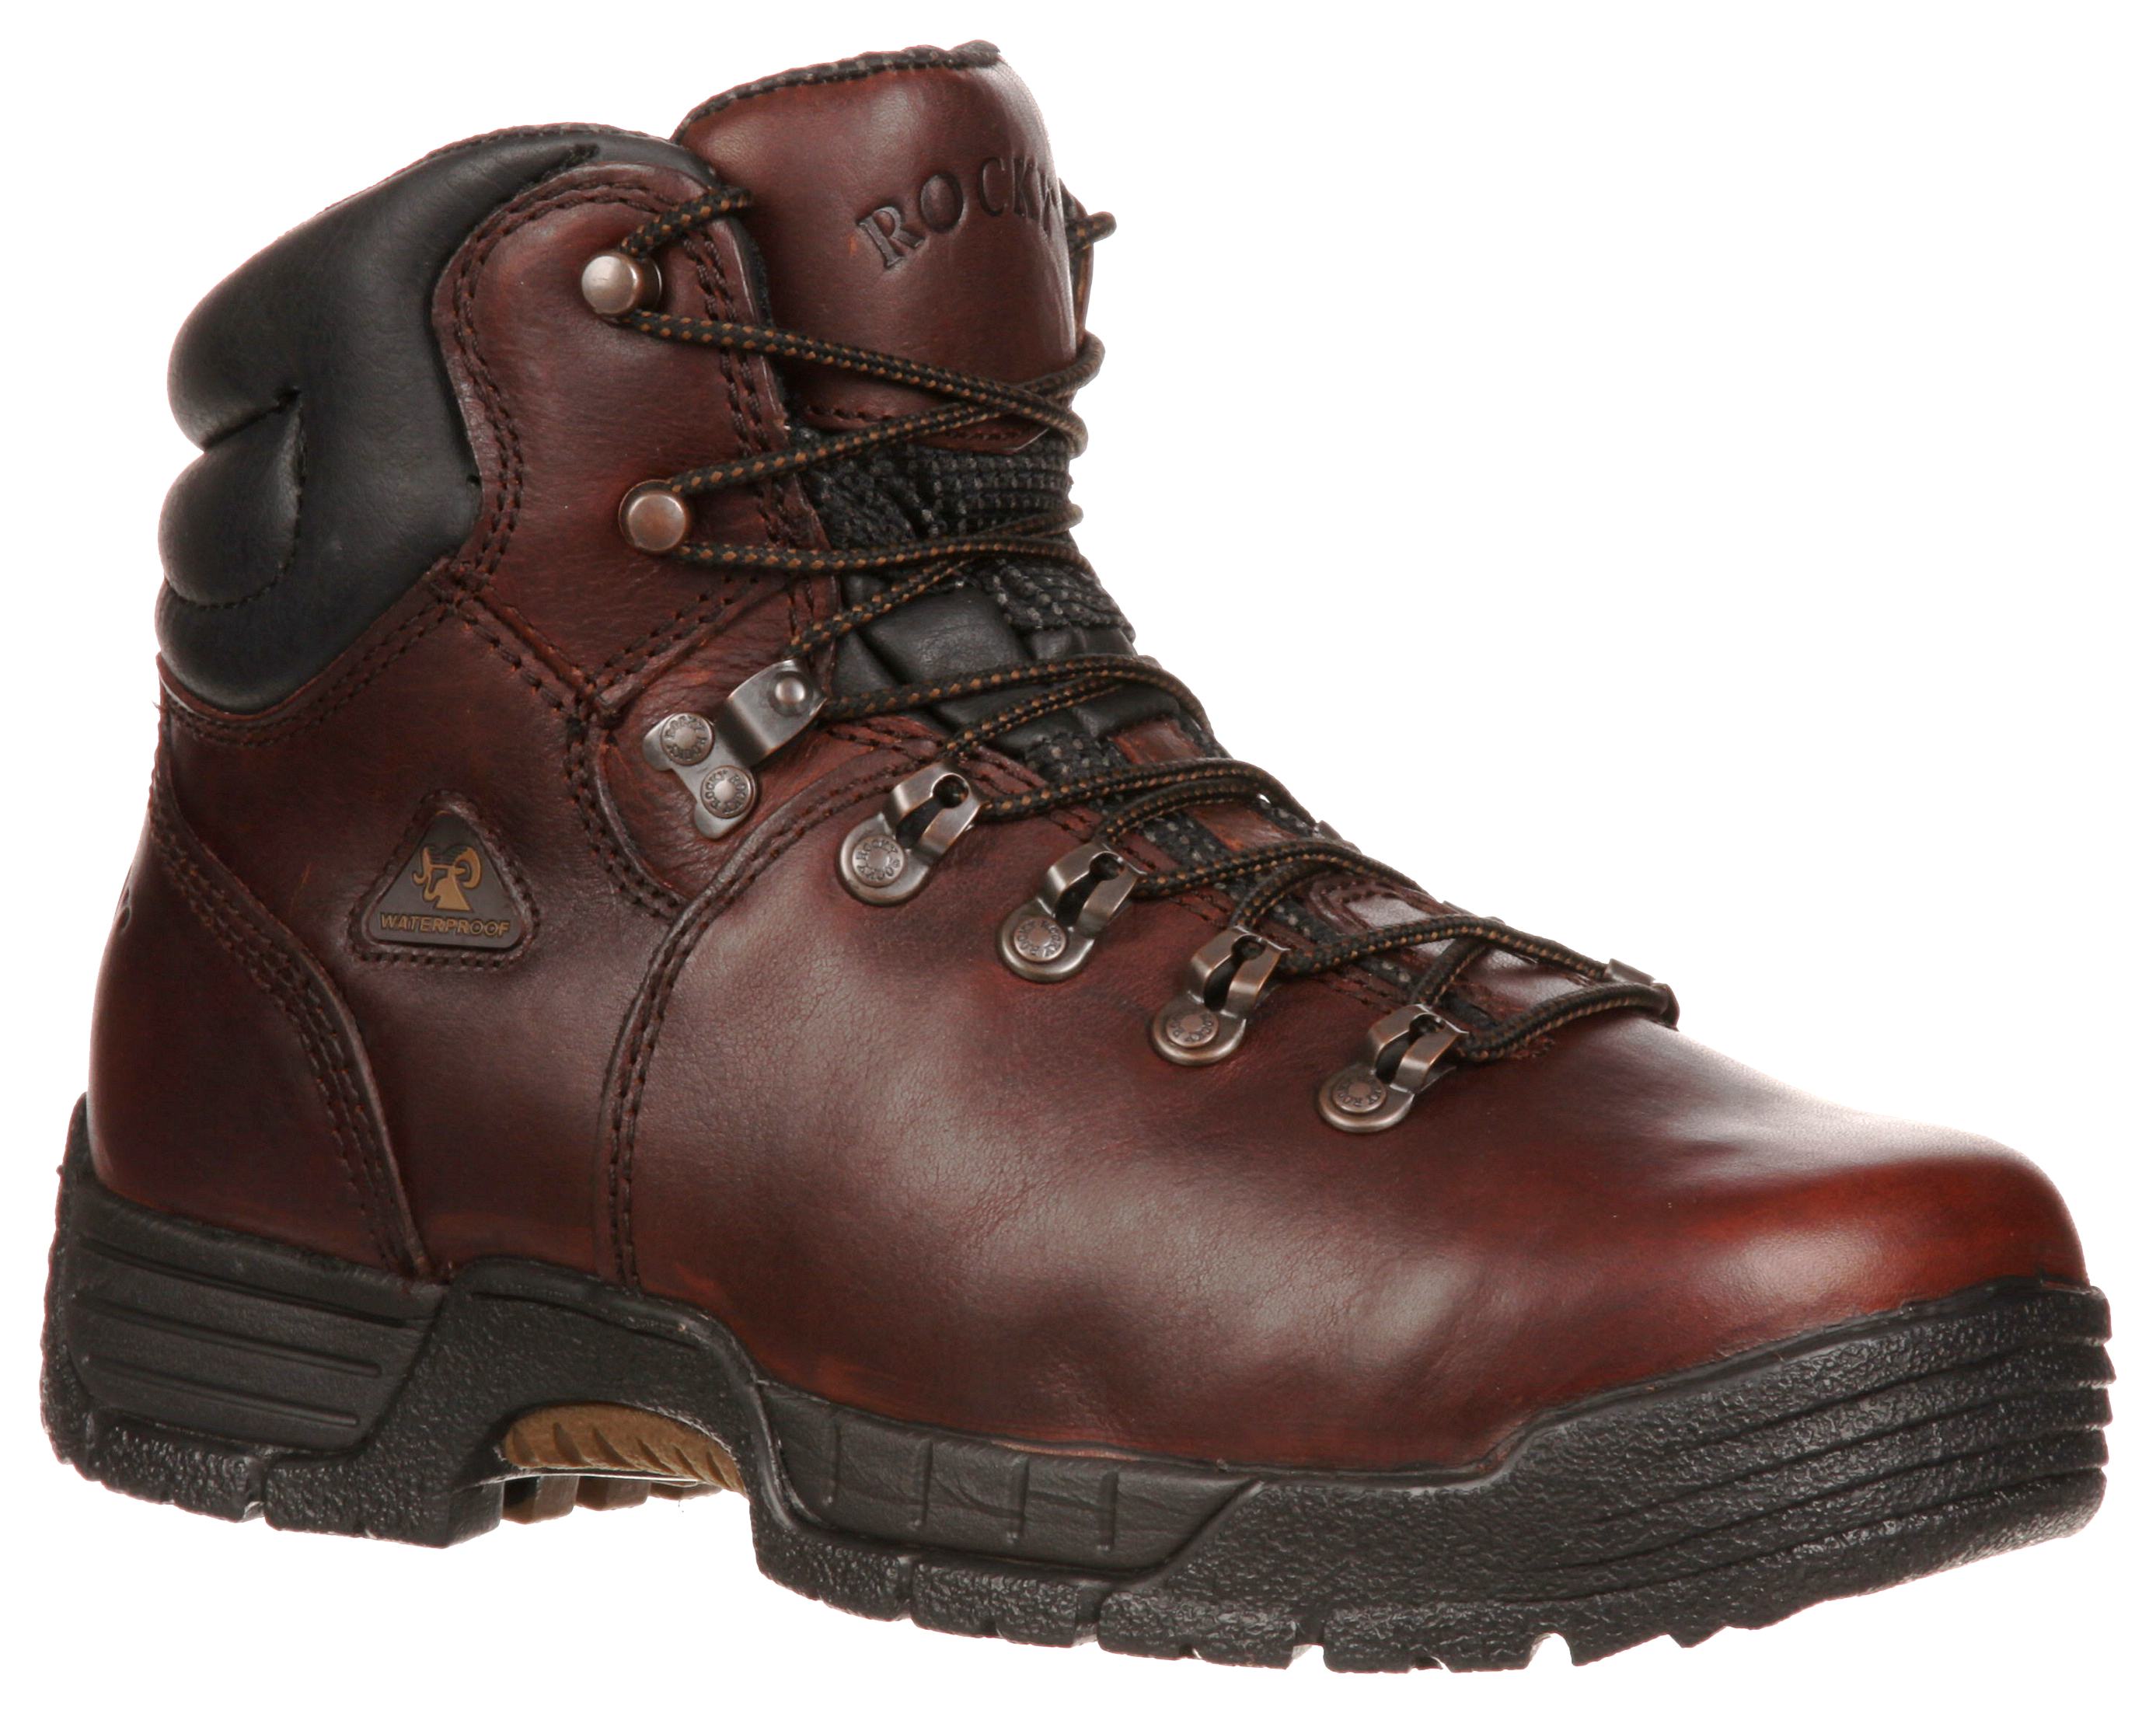 ROCKY MobiLite Waterproof Work Boots for Men - Brown - 10.5 W